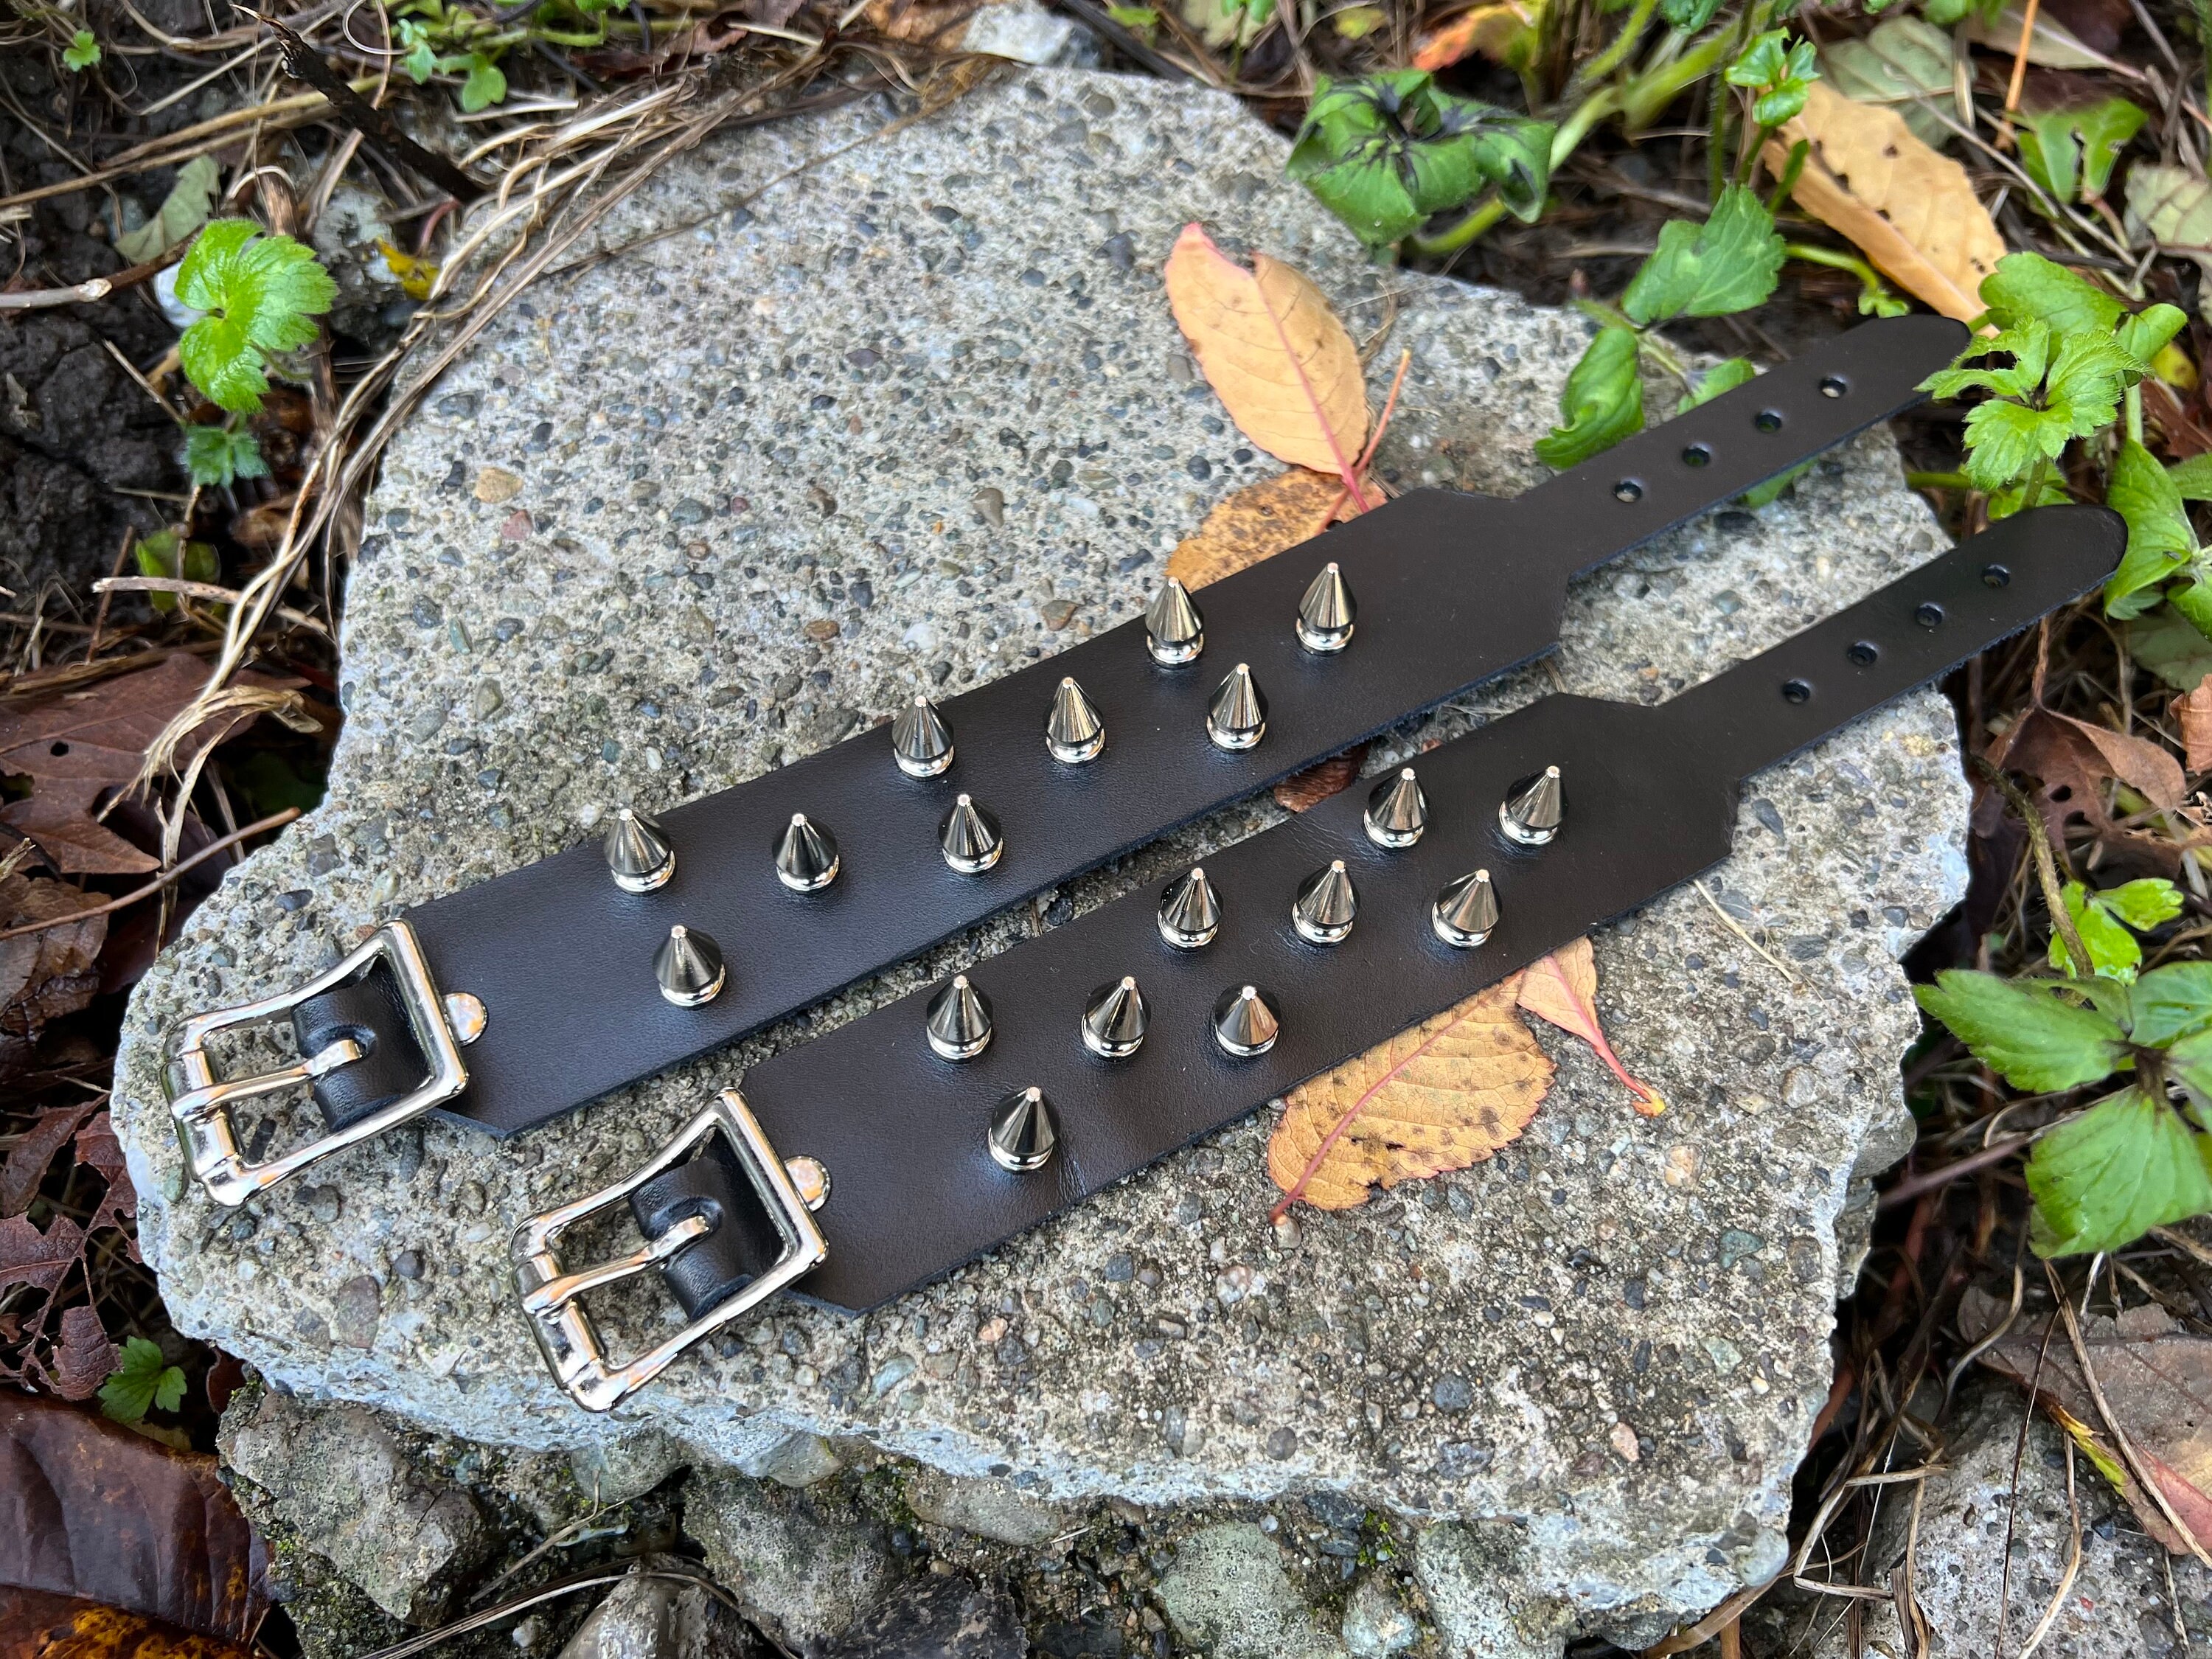 Crust Punk Spike Bracelet With 9 1/2 Spikes 